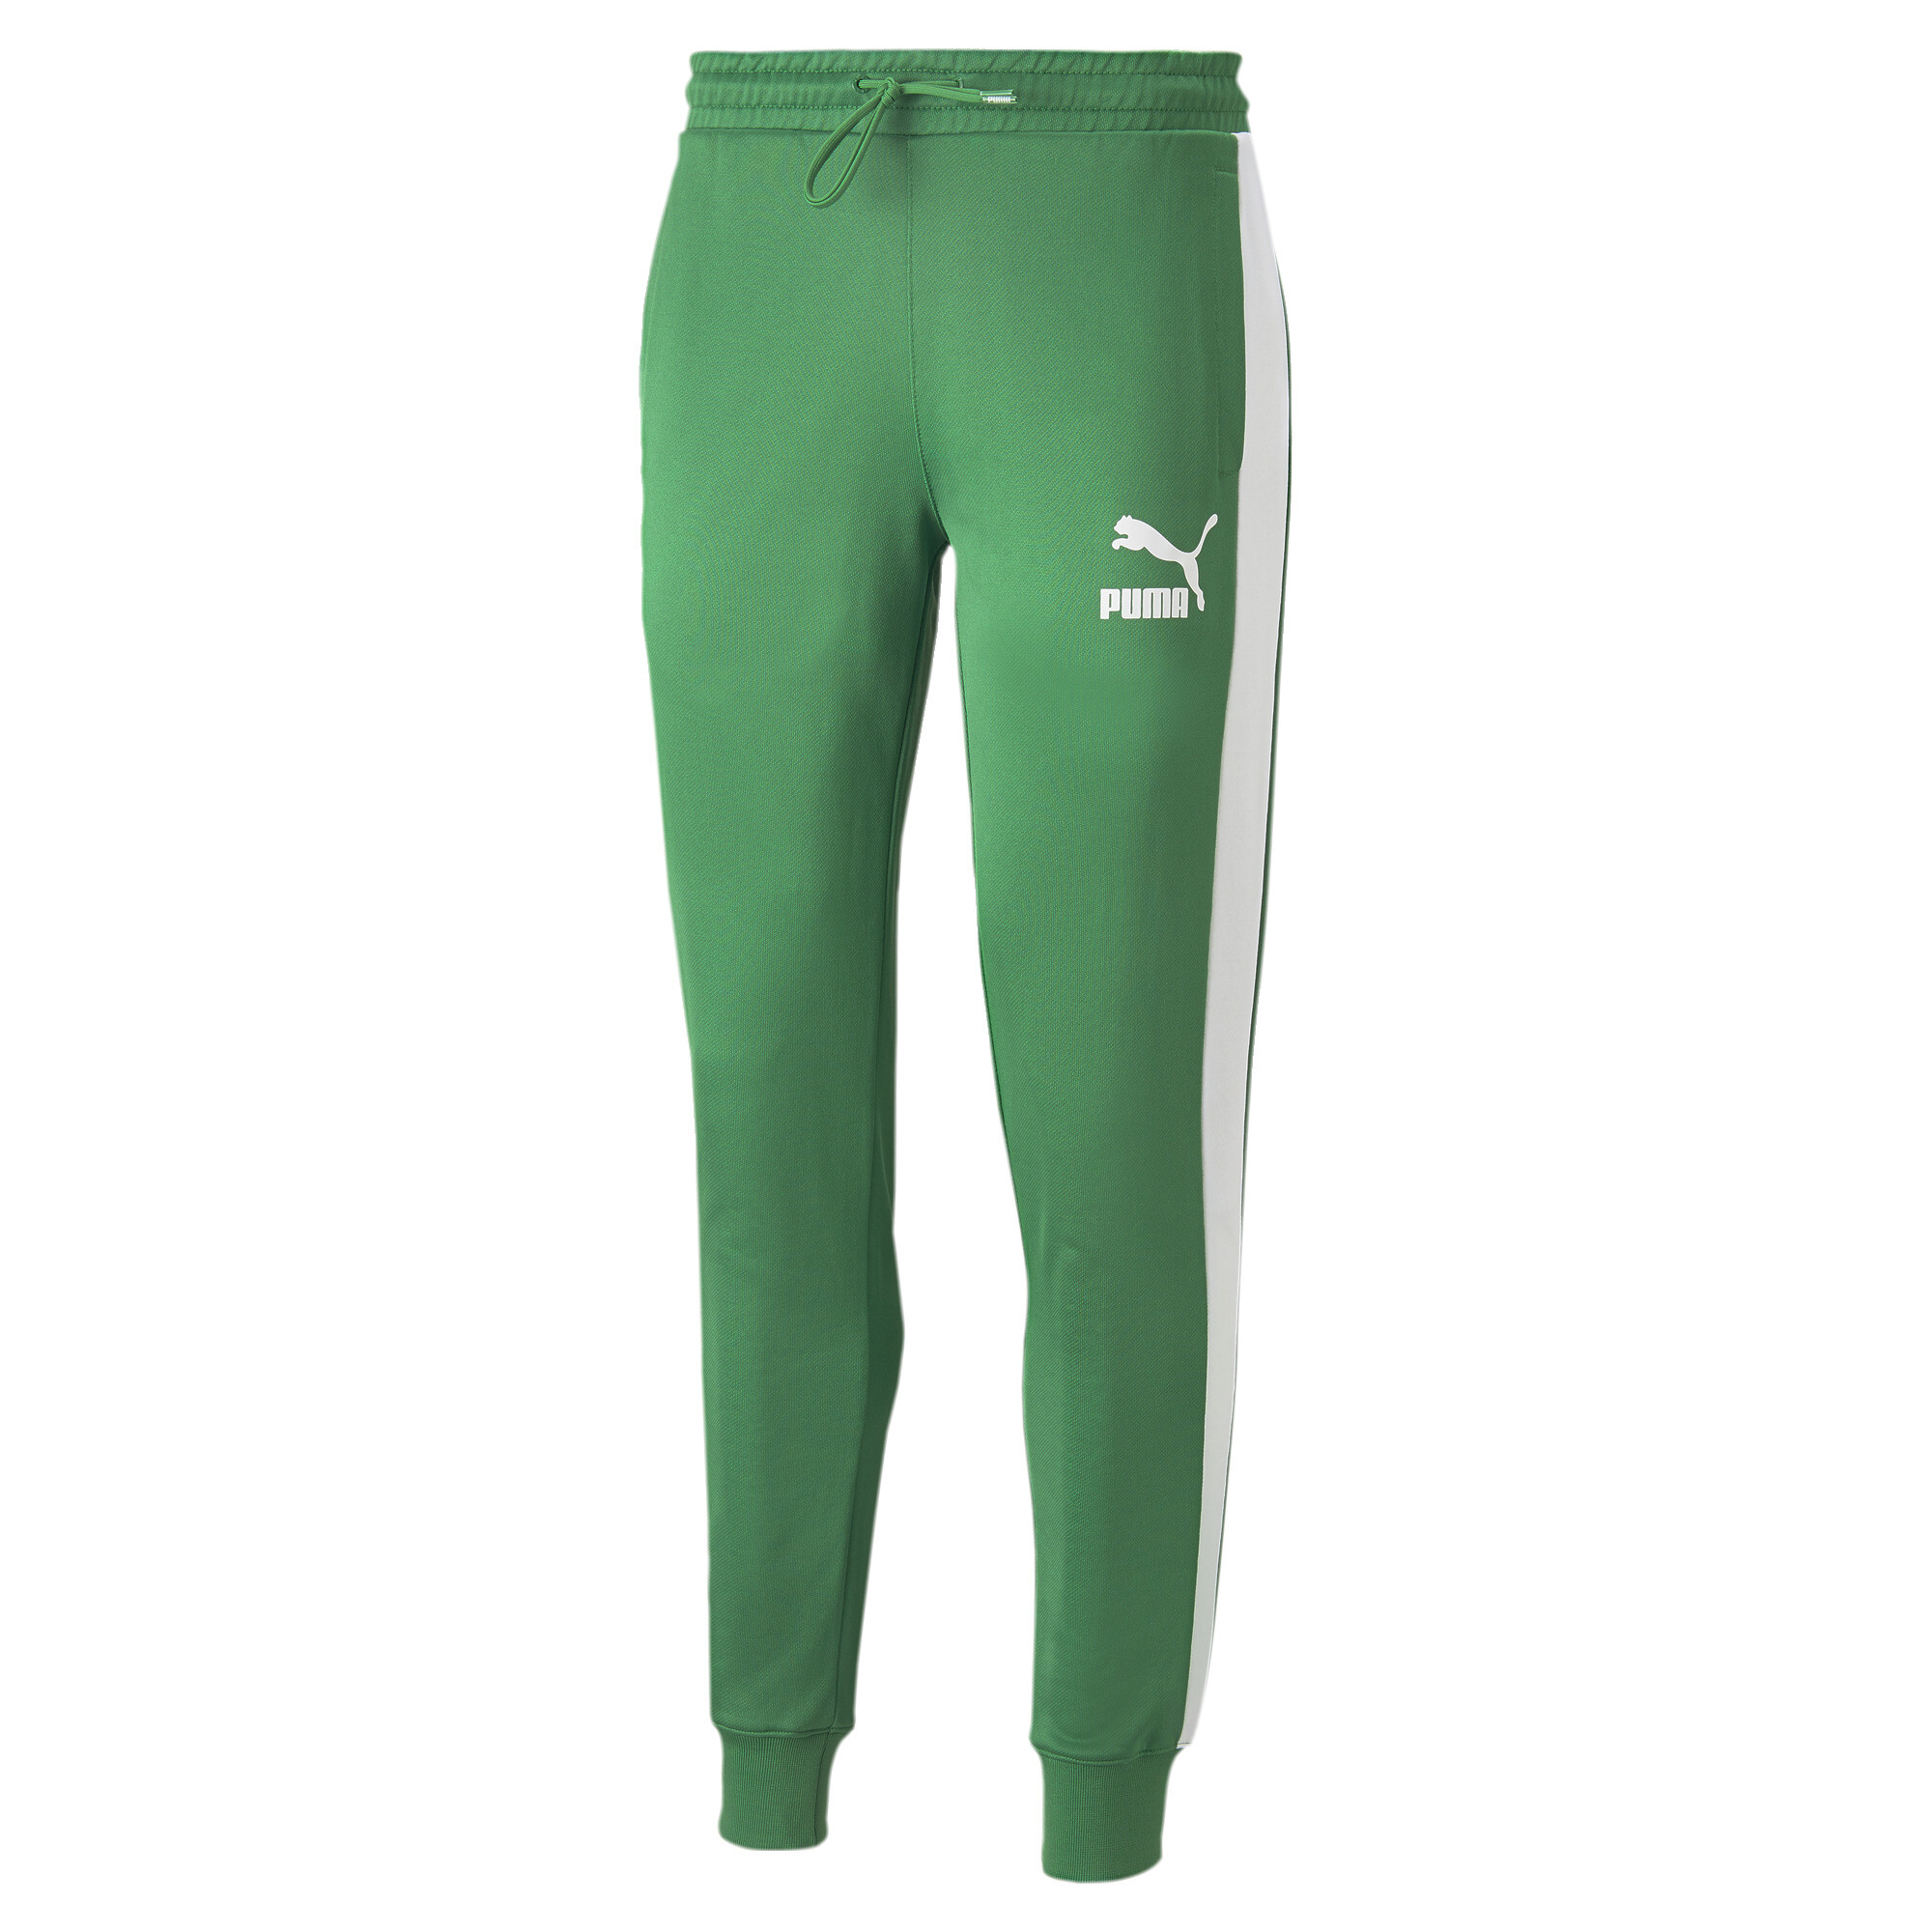 Men's Puma Iconic T7's Track Pants, Green, Size 4XL, Clothing